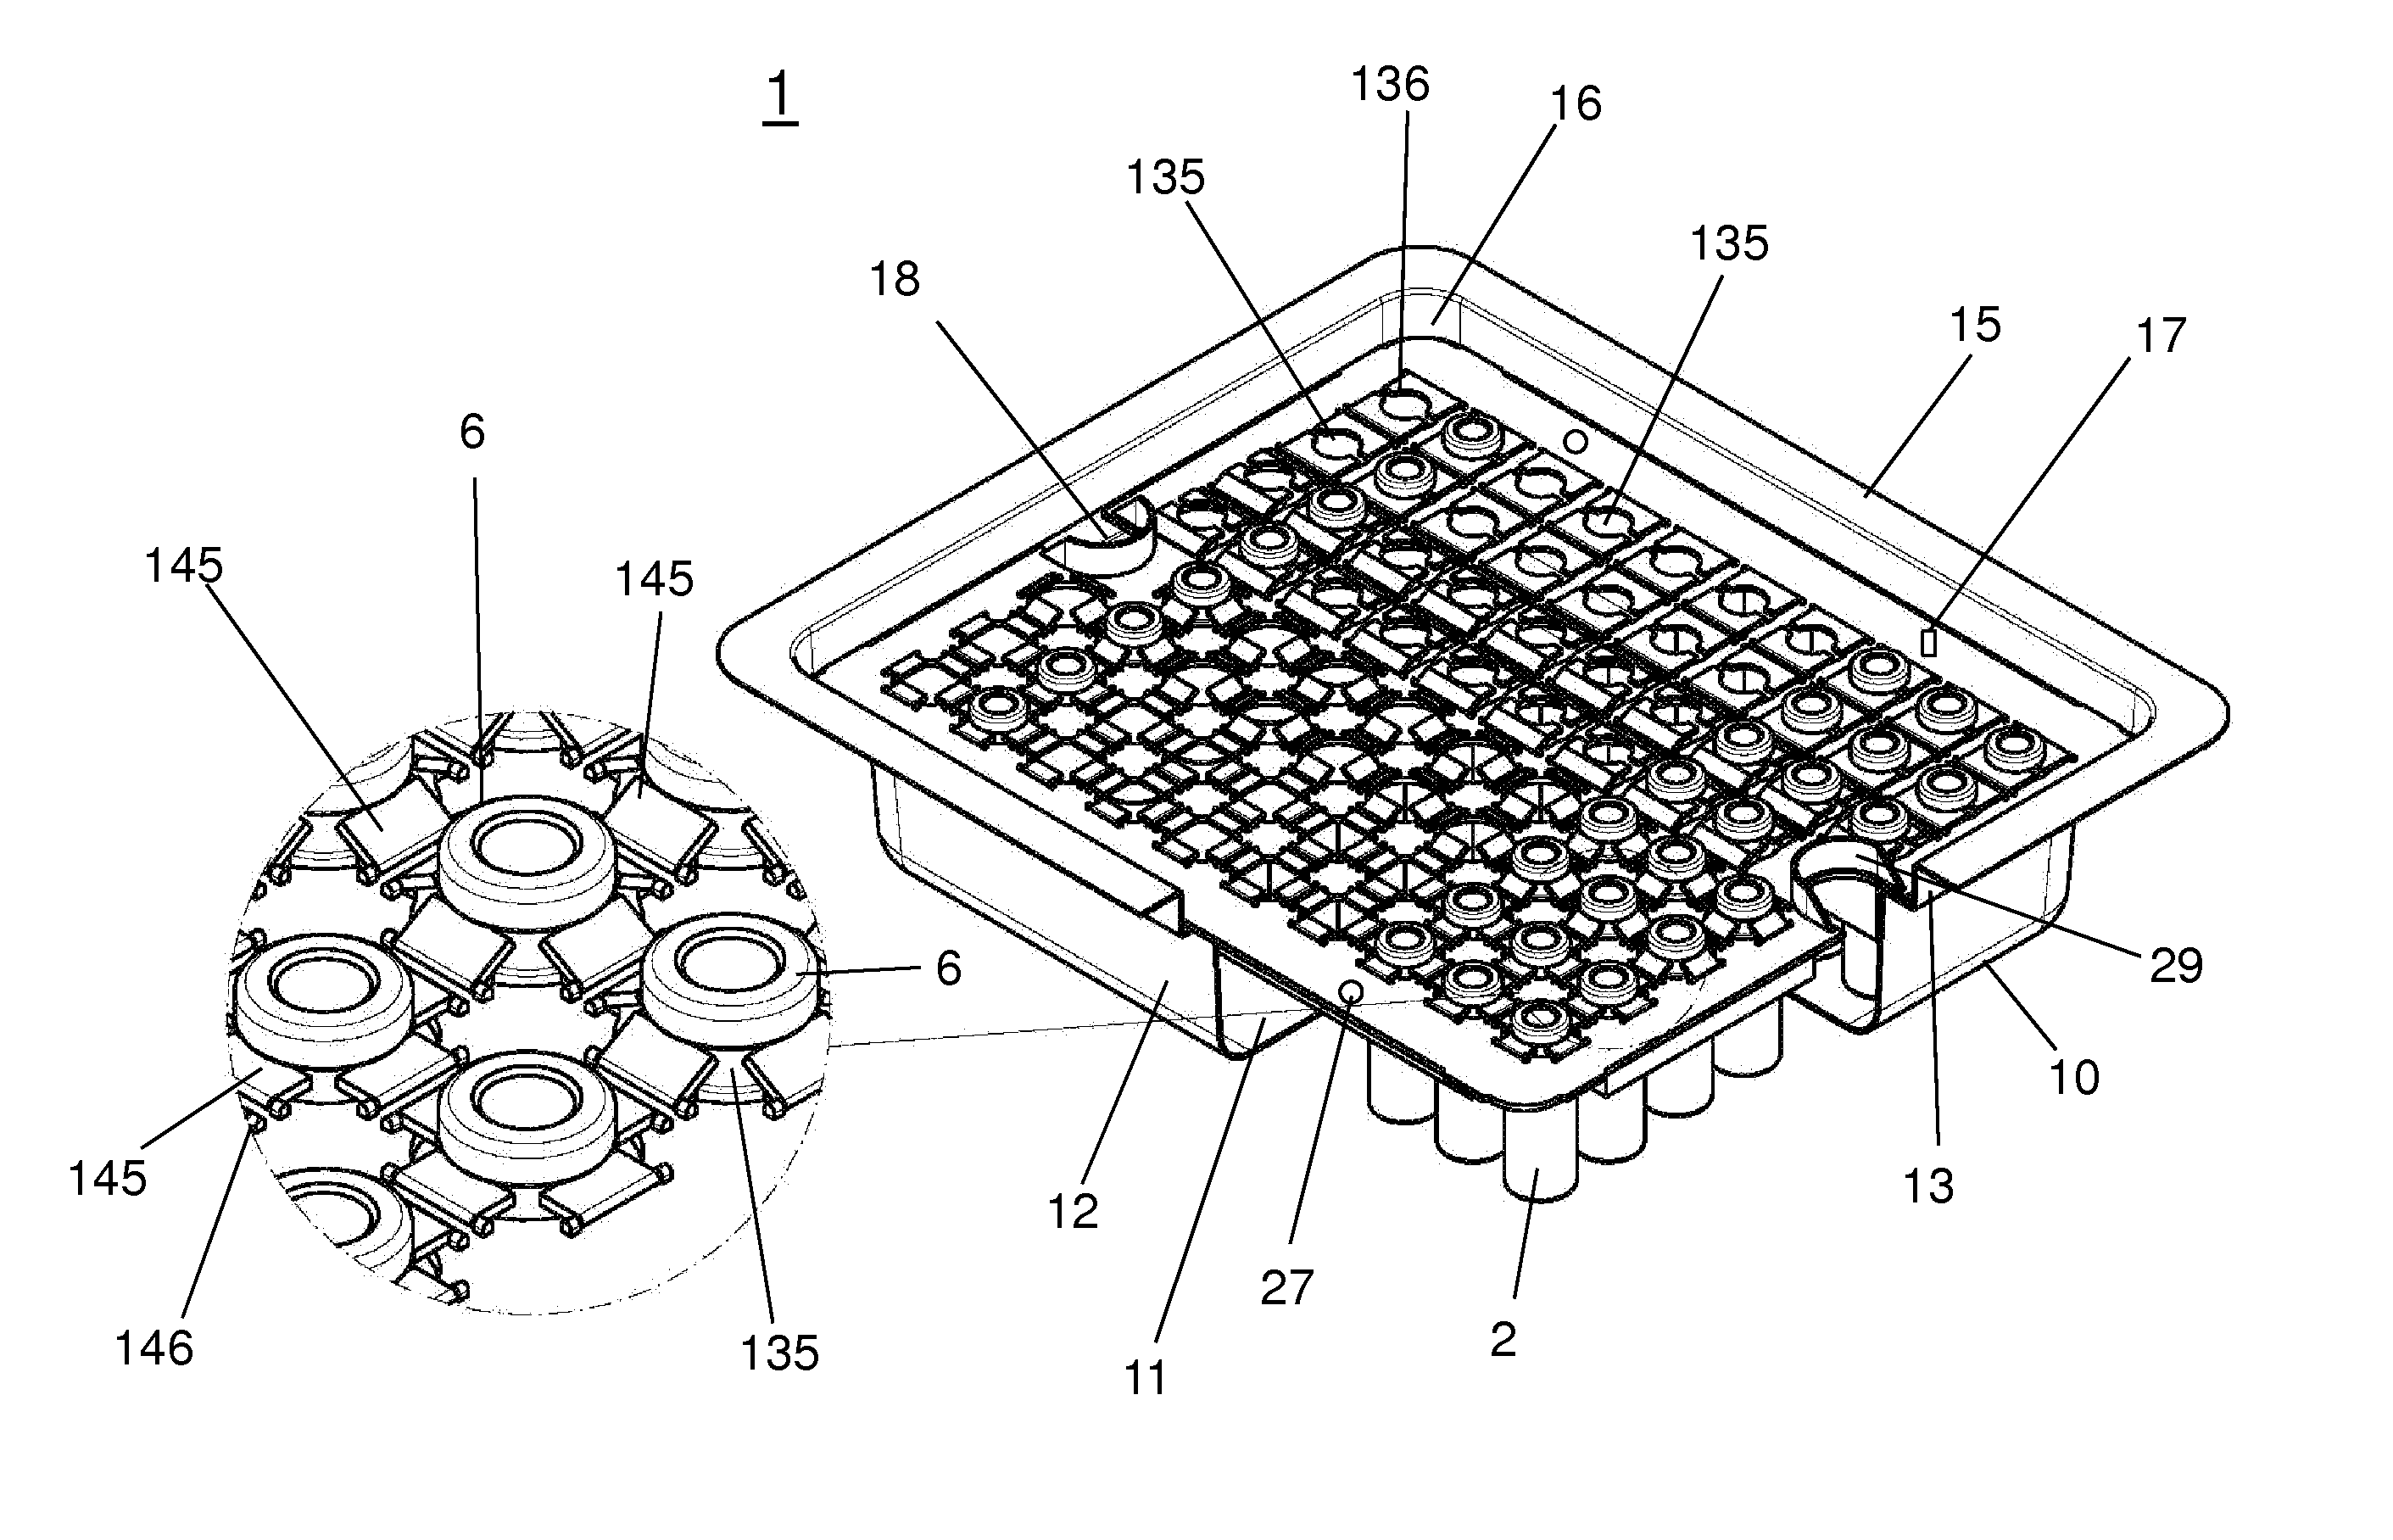 Holding structure for simultaneously holding a plurality of containers for medical, pharmaceutical or cosmetic applications and transport or packaging container with holding structure